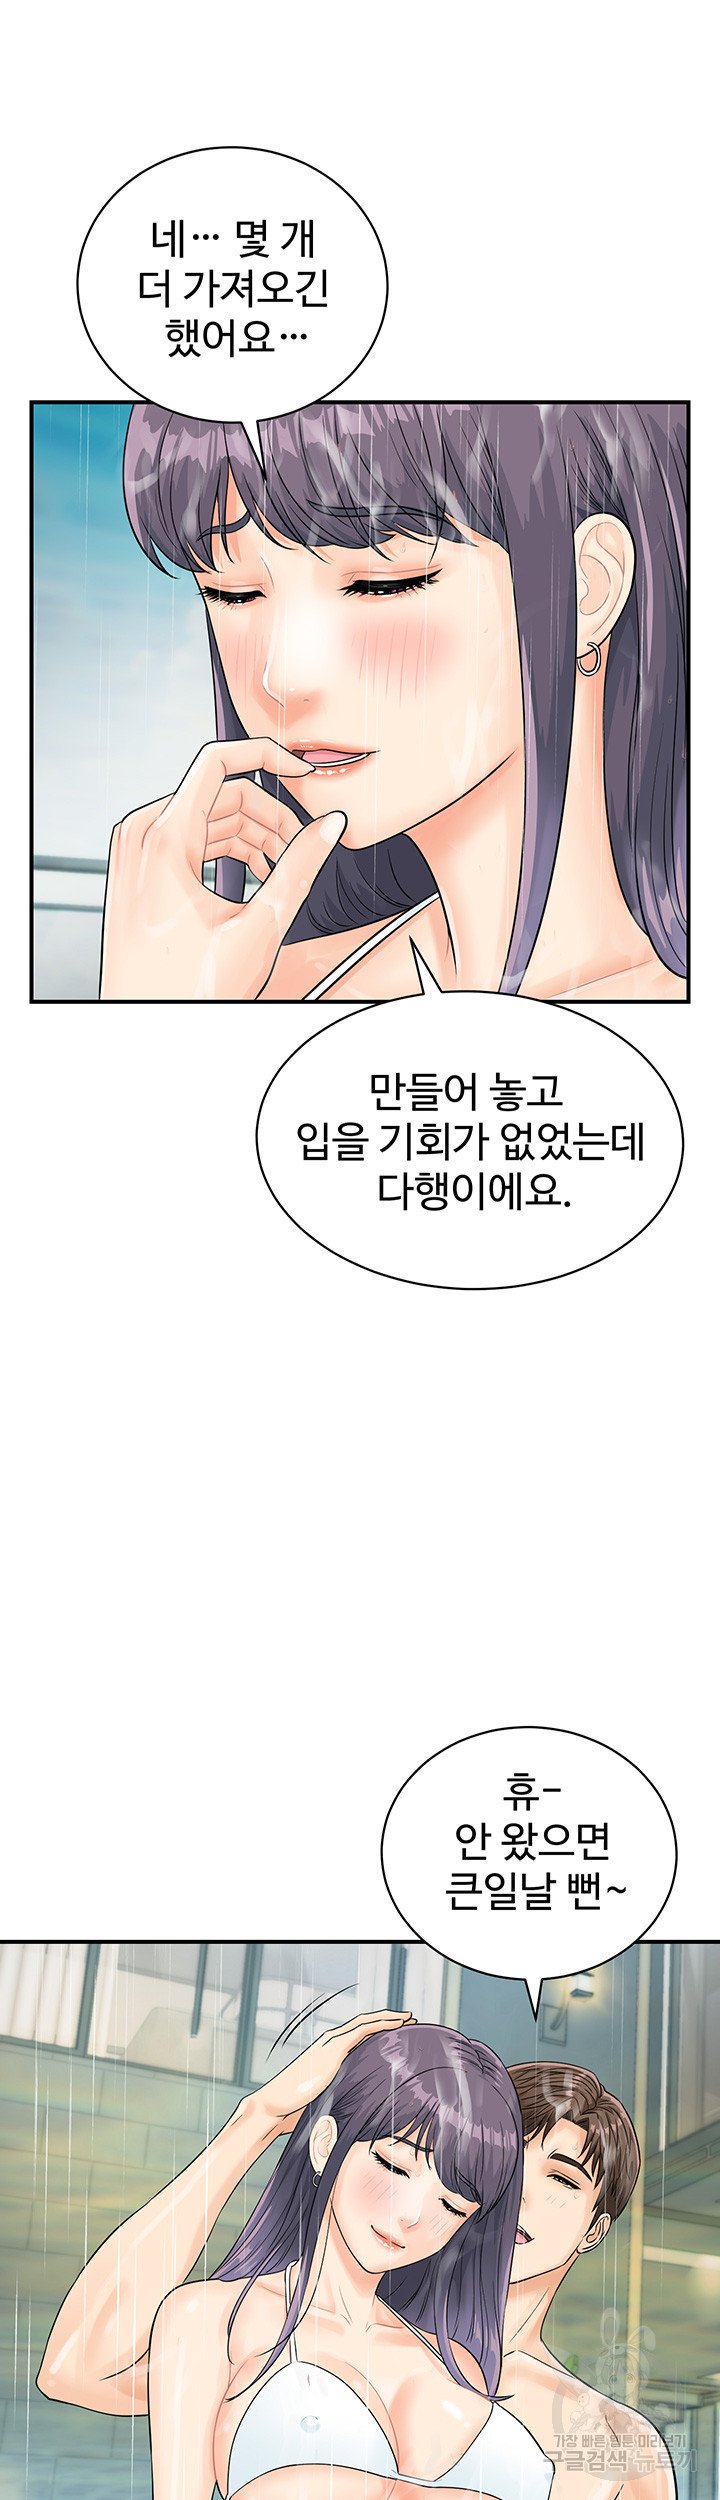 please-scan-here-raw-chap-21-14